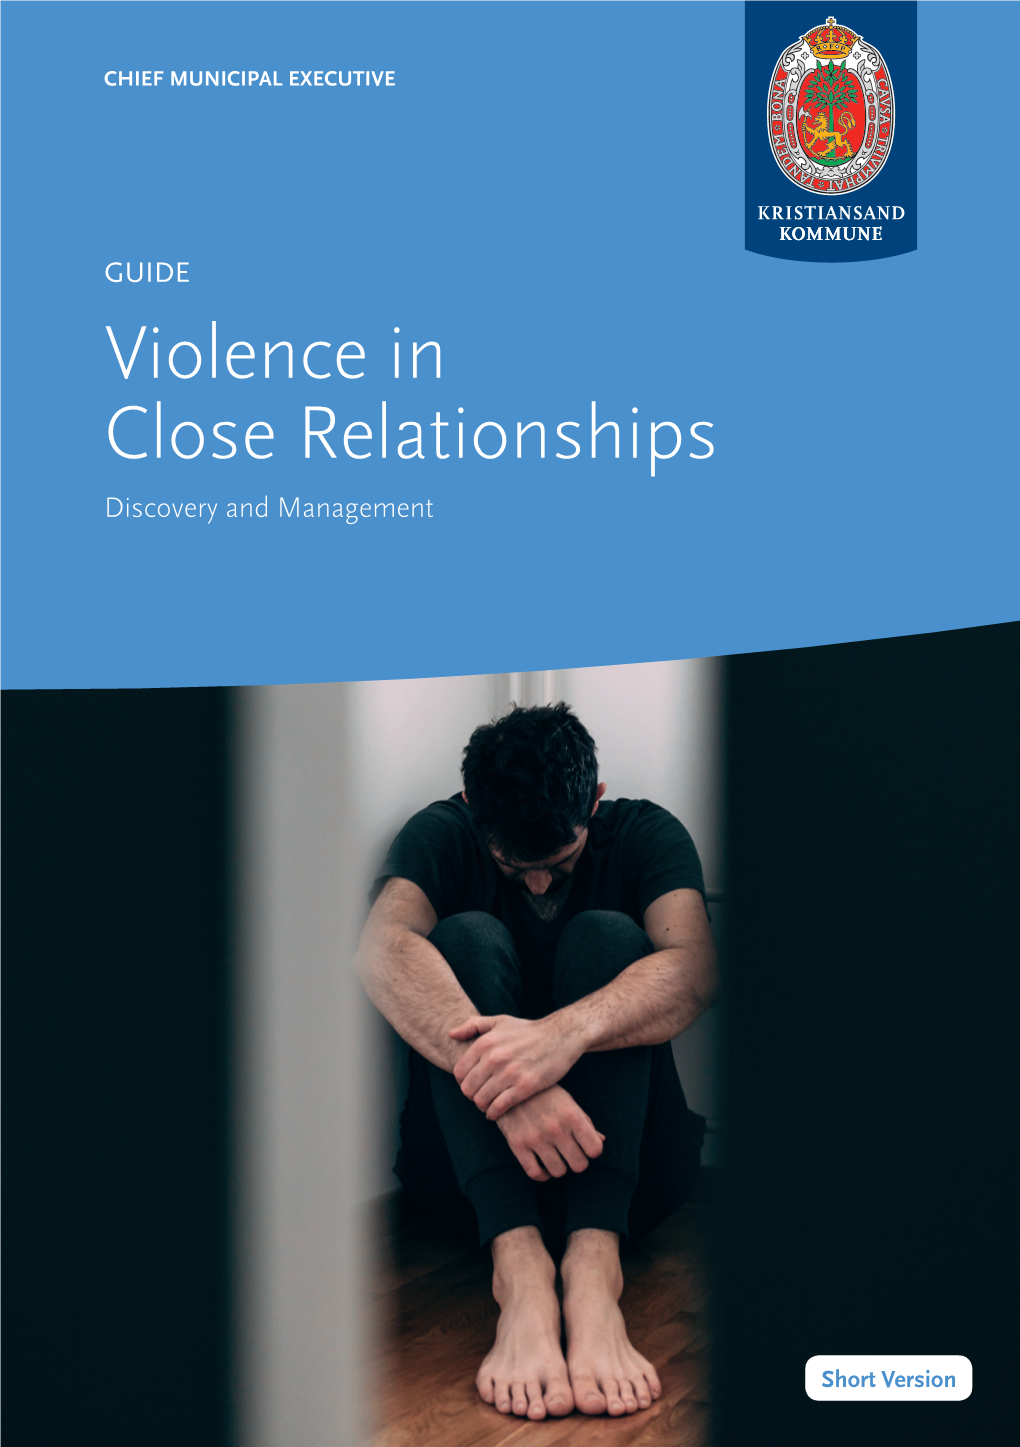 Violence in Close Relationships Discovery and Management